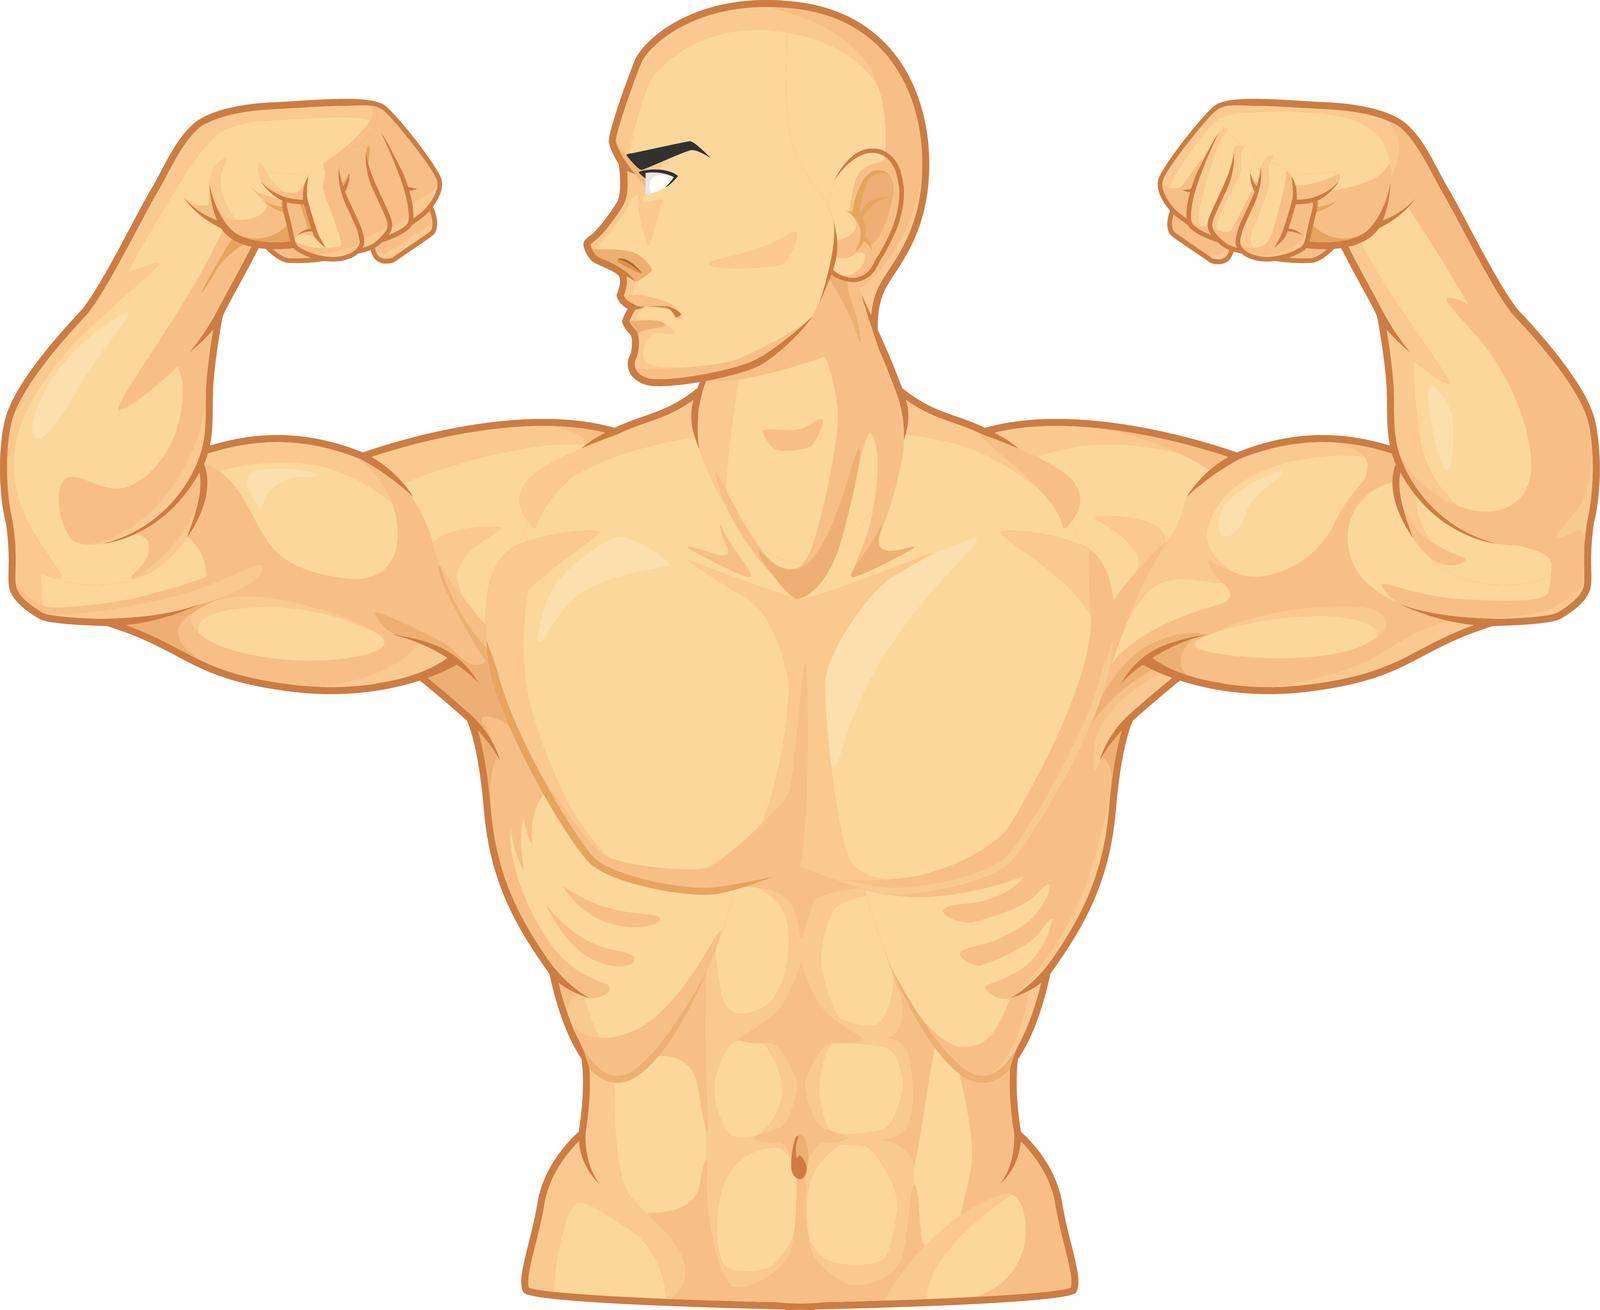 Bodybuilder Flexing Arm Bicep Muscle Cartoon Vector Drawing Isolated